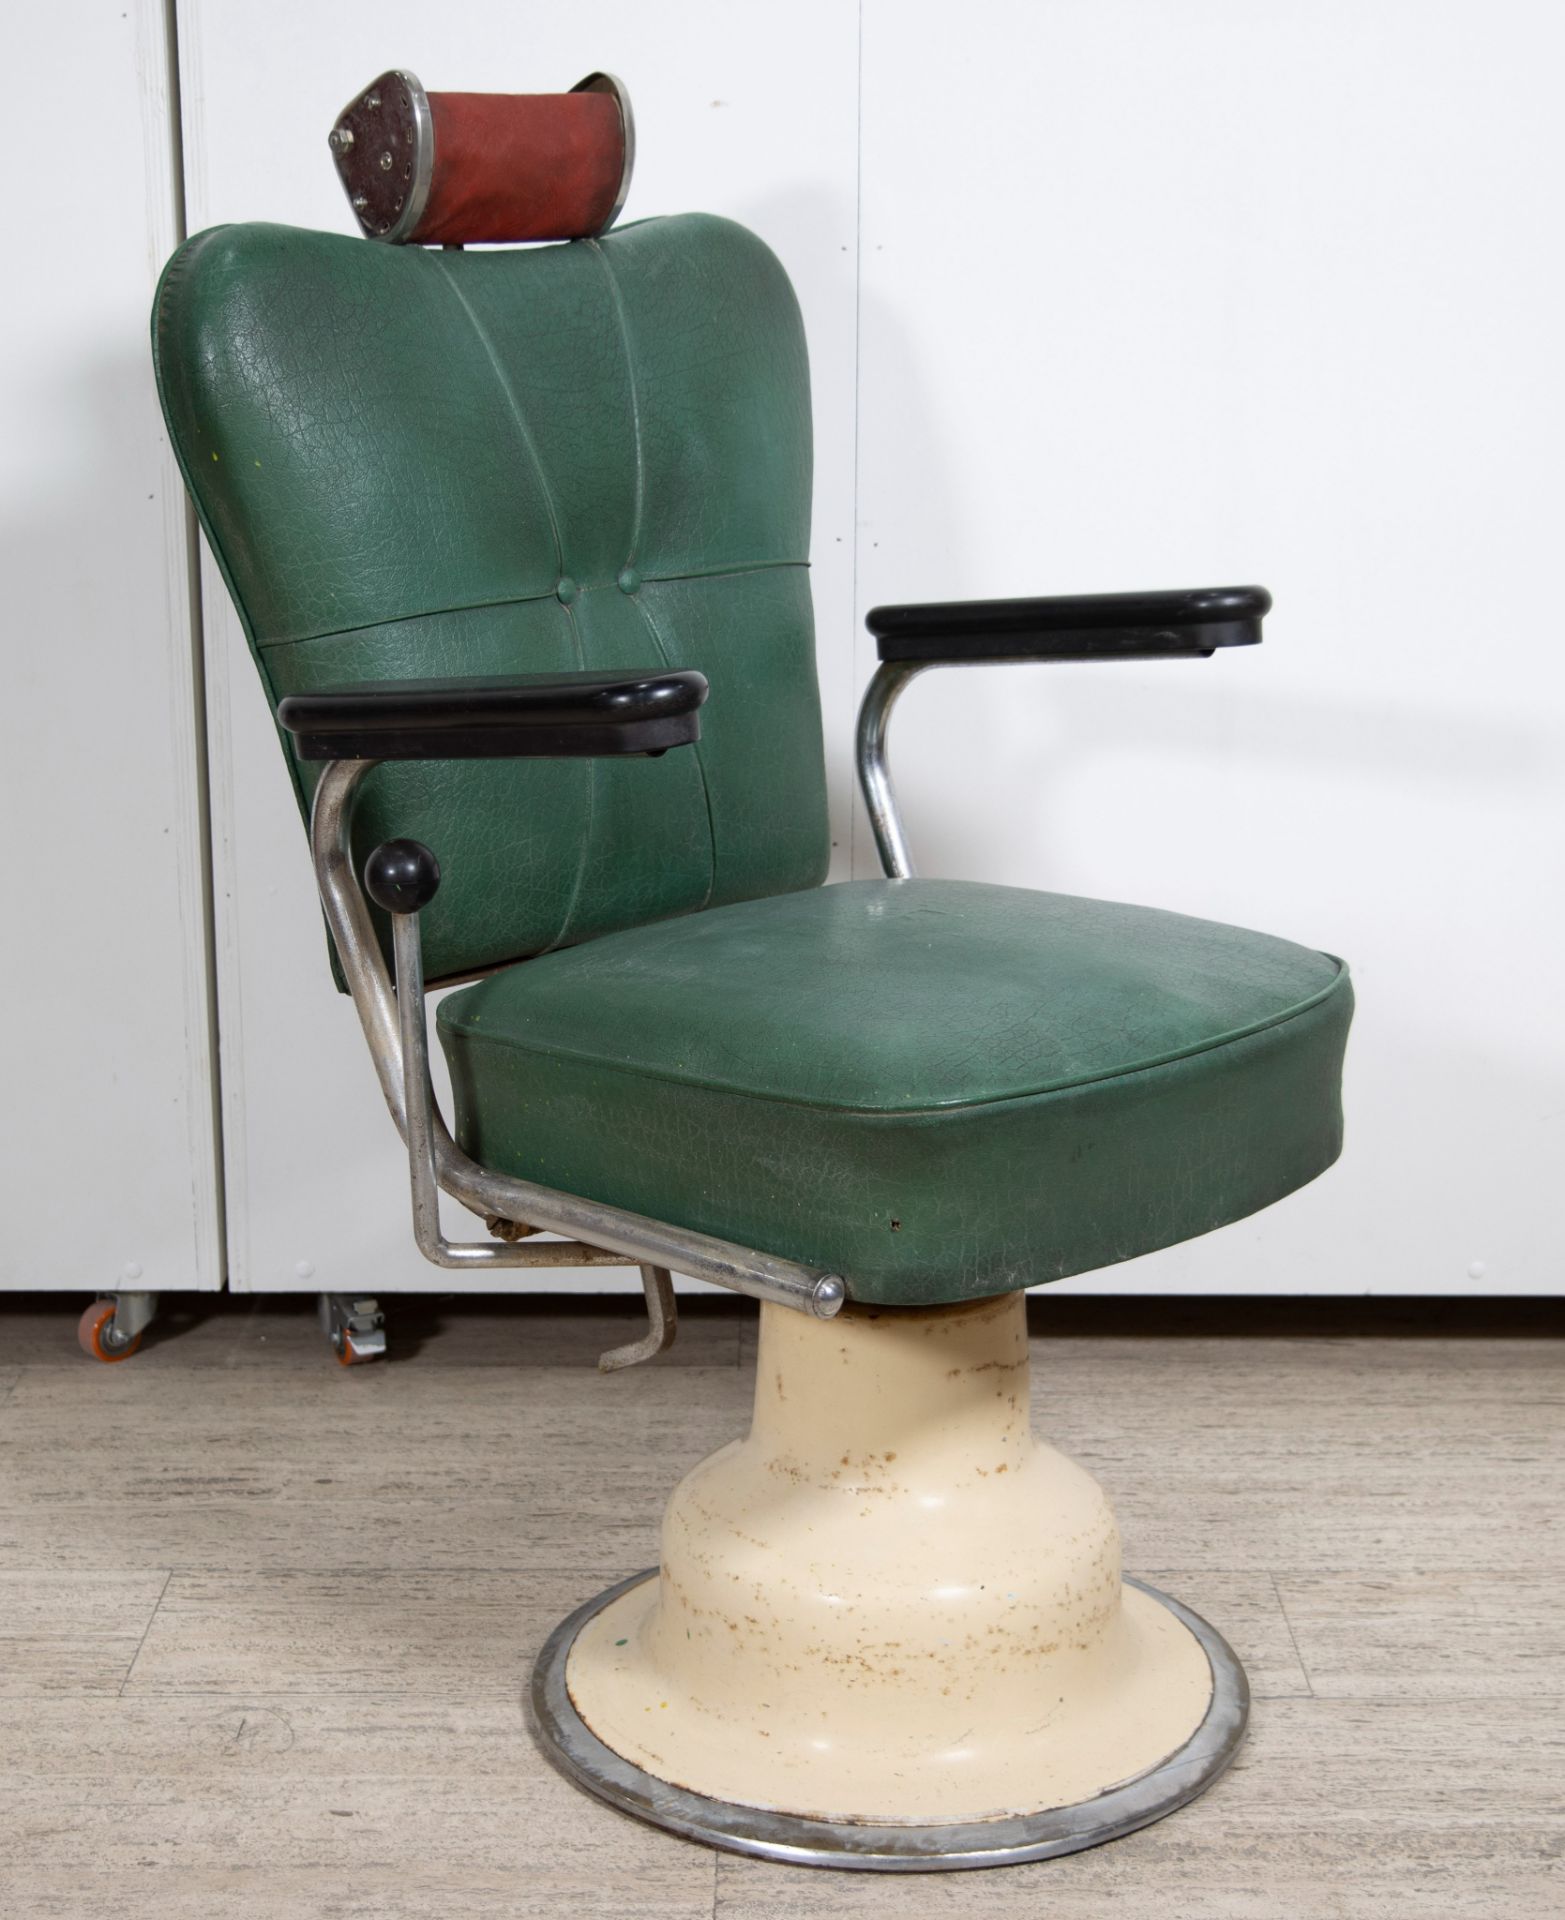 Vintage barber chair from the 1970s - Bild 2 aus 3